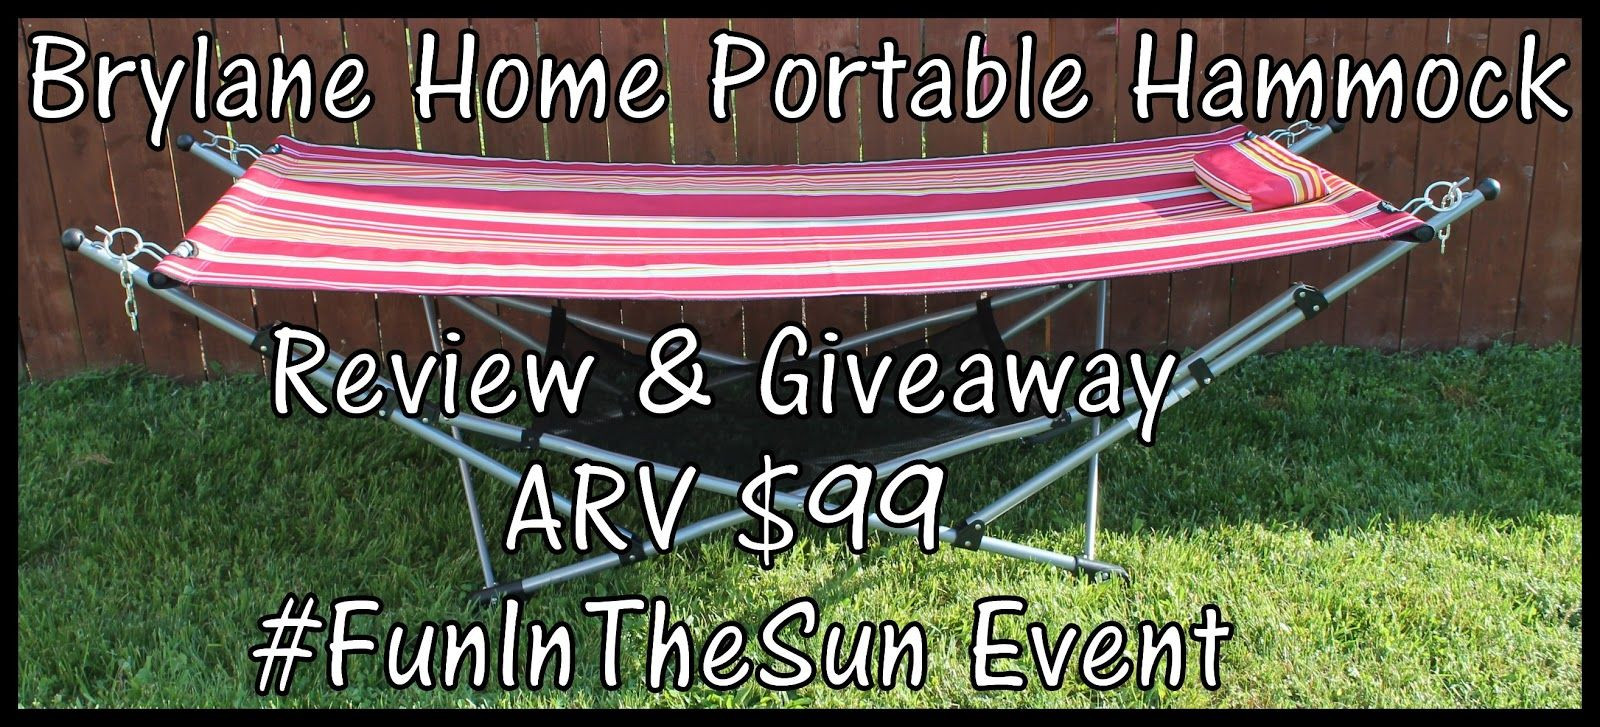 Thrifty Backyard Portable Buildings-Rent-2-Own
 Brylane Home Portable Hammock FunInTheSun With images